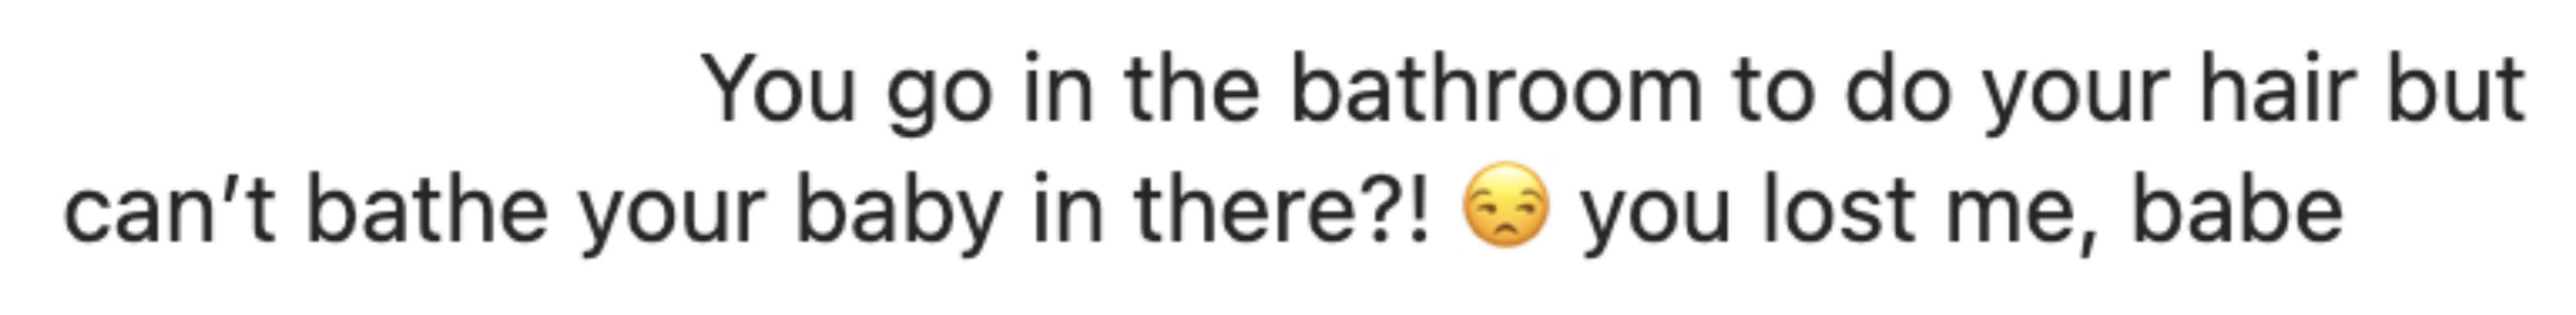 A comment saying &quot;You go in the bathroom to do your hair but can&#x27;t bathe your baby in there?! you lost me babe&quot;